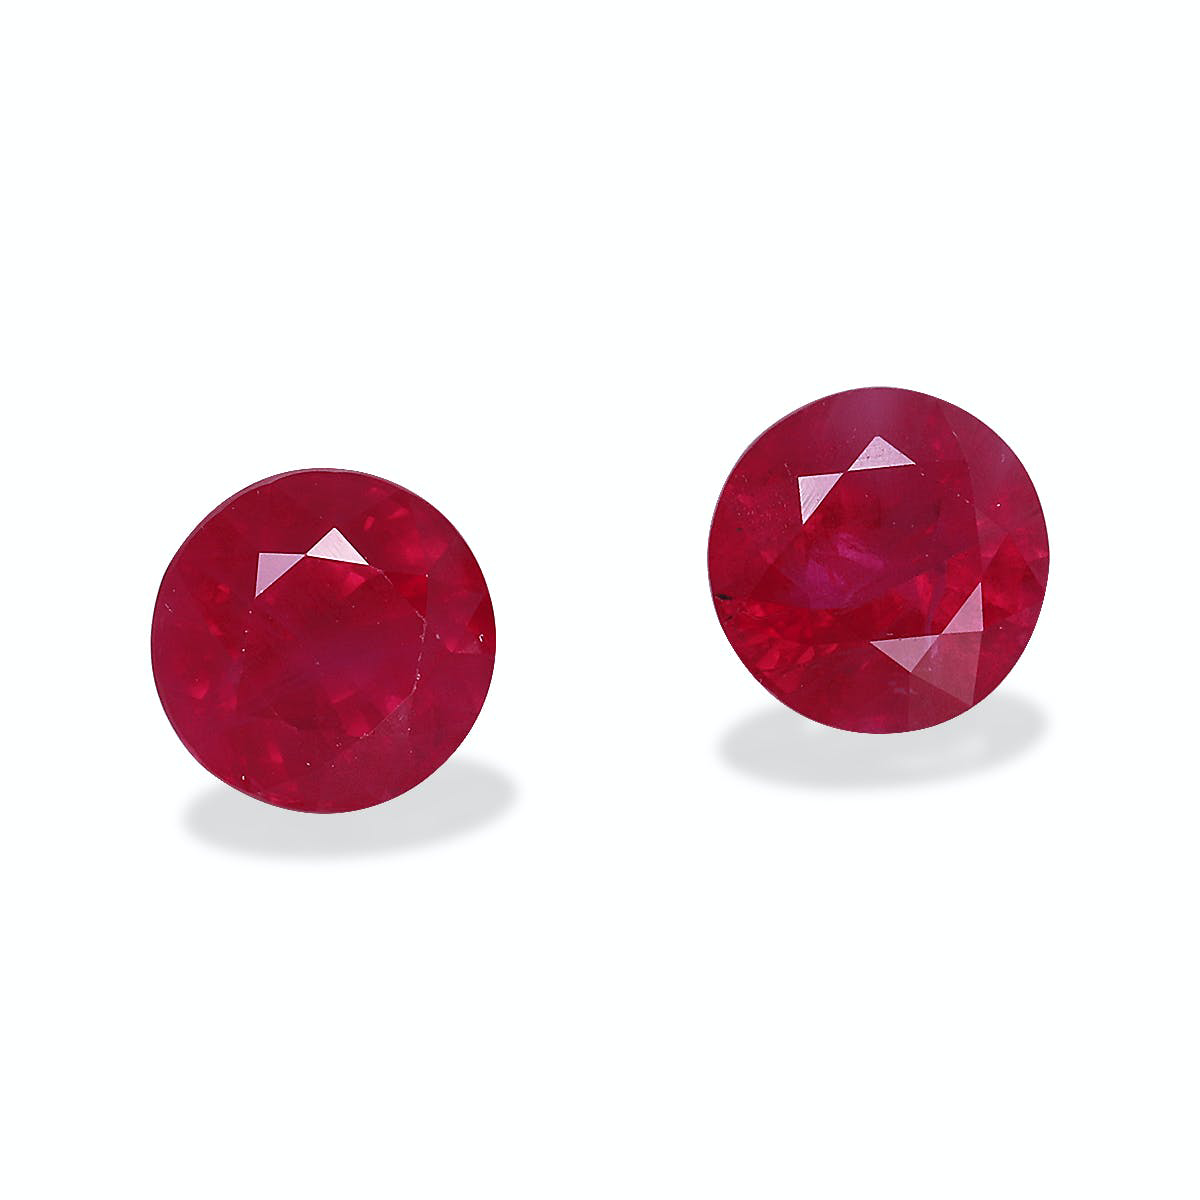 Picture of Rose Red Burma Ruby 1.95ct - 5mm Pair (WC8941-16)